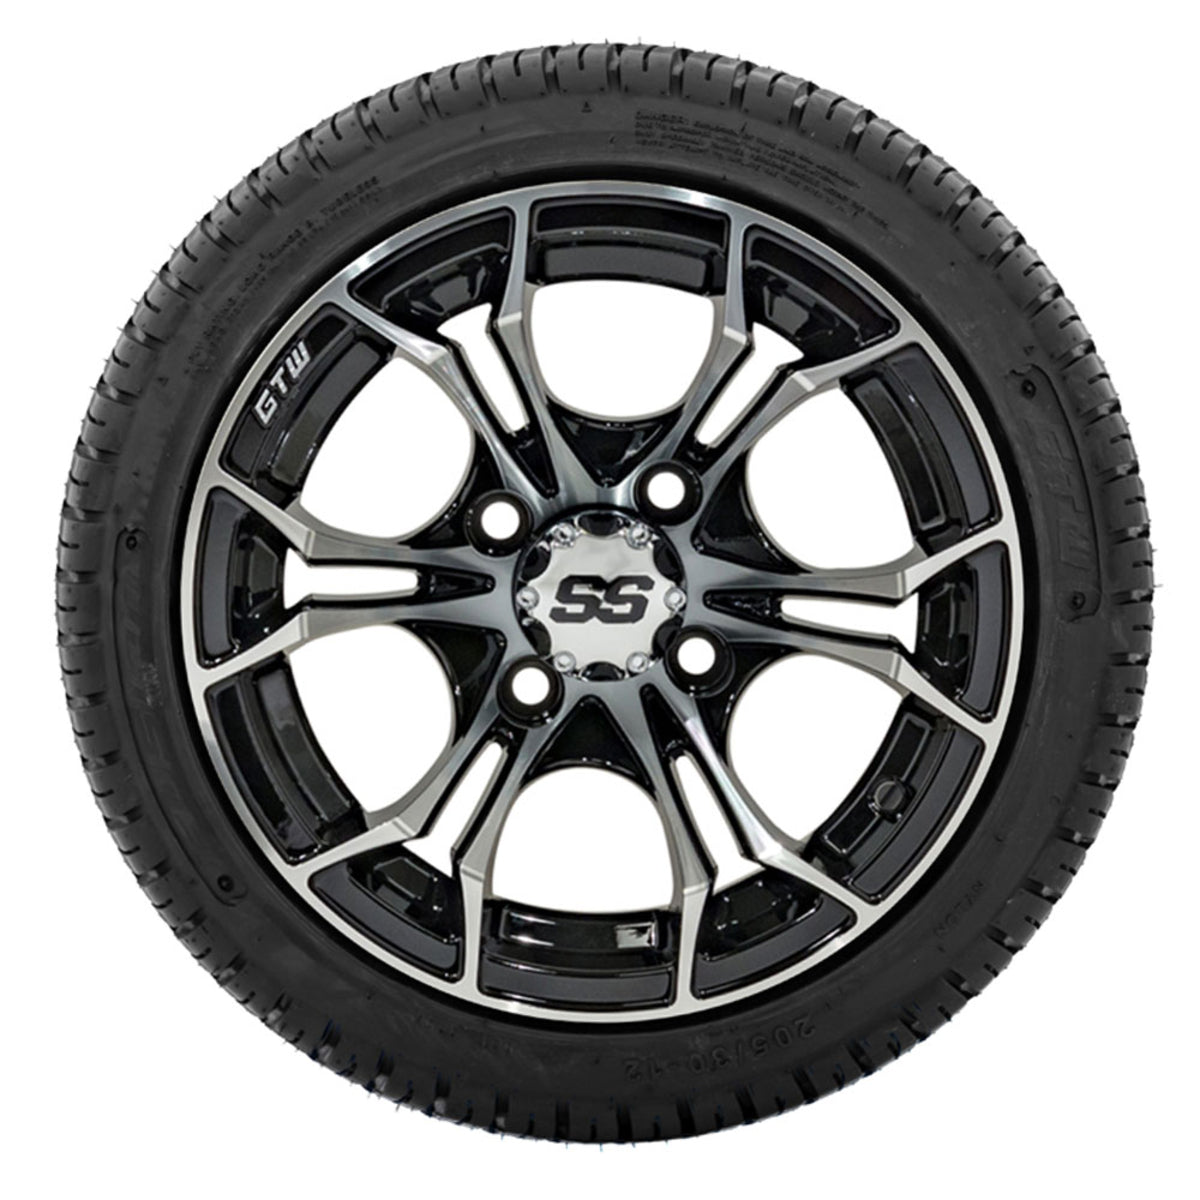 12" GTW Spyder Machined and Black Wheels with 18" Fusion DOT Street Tires "‚Äú Set of 4